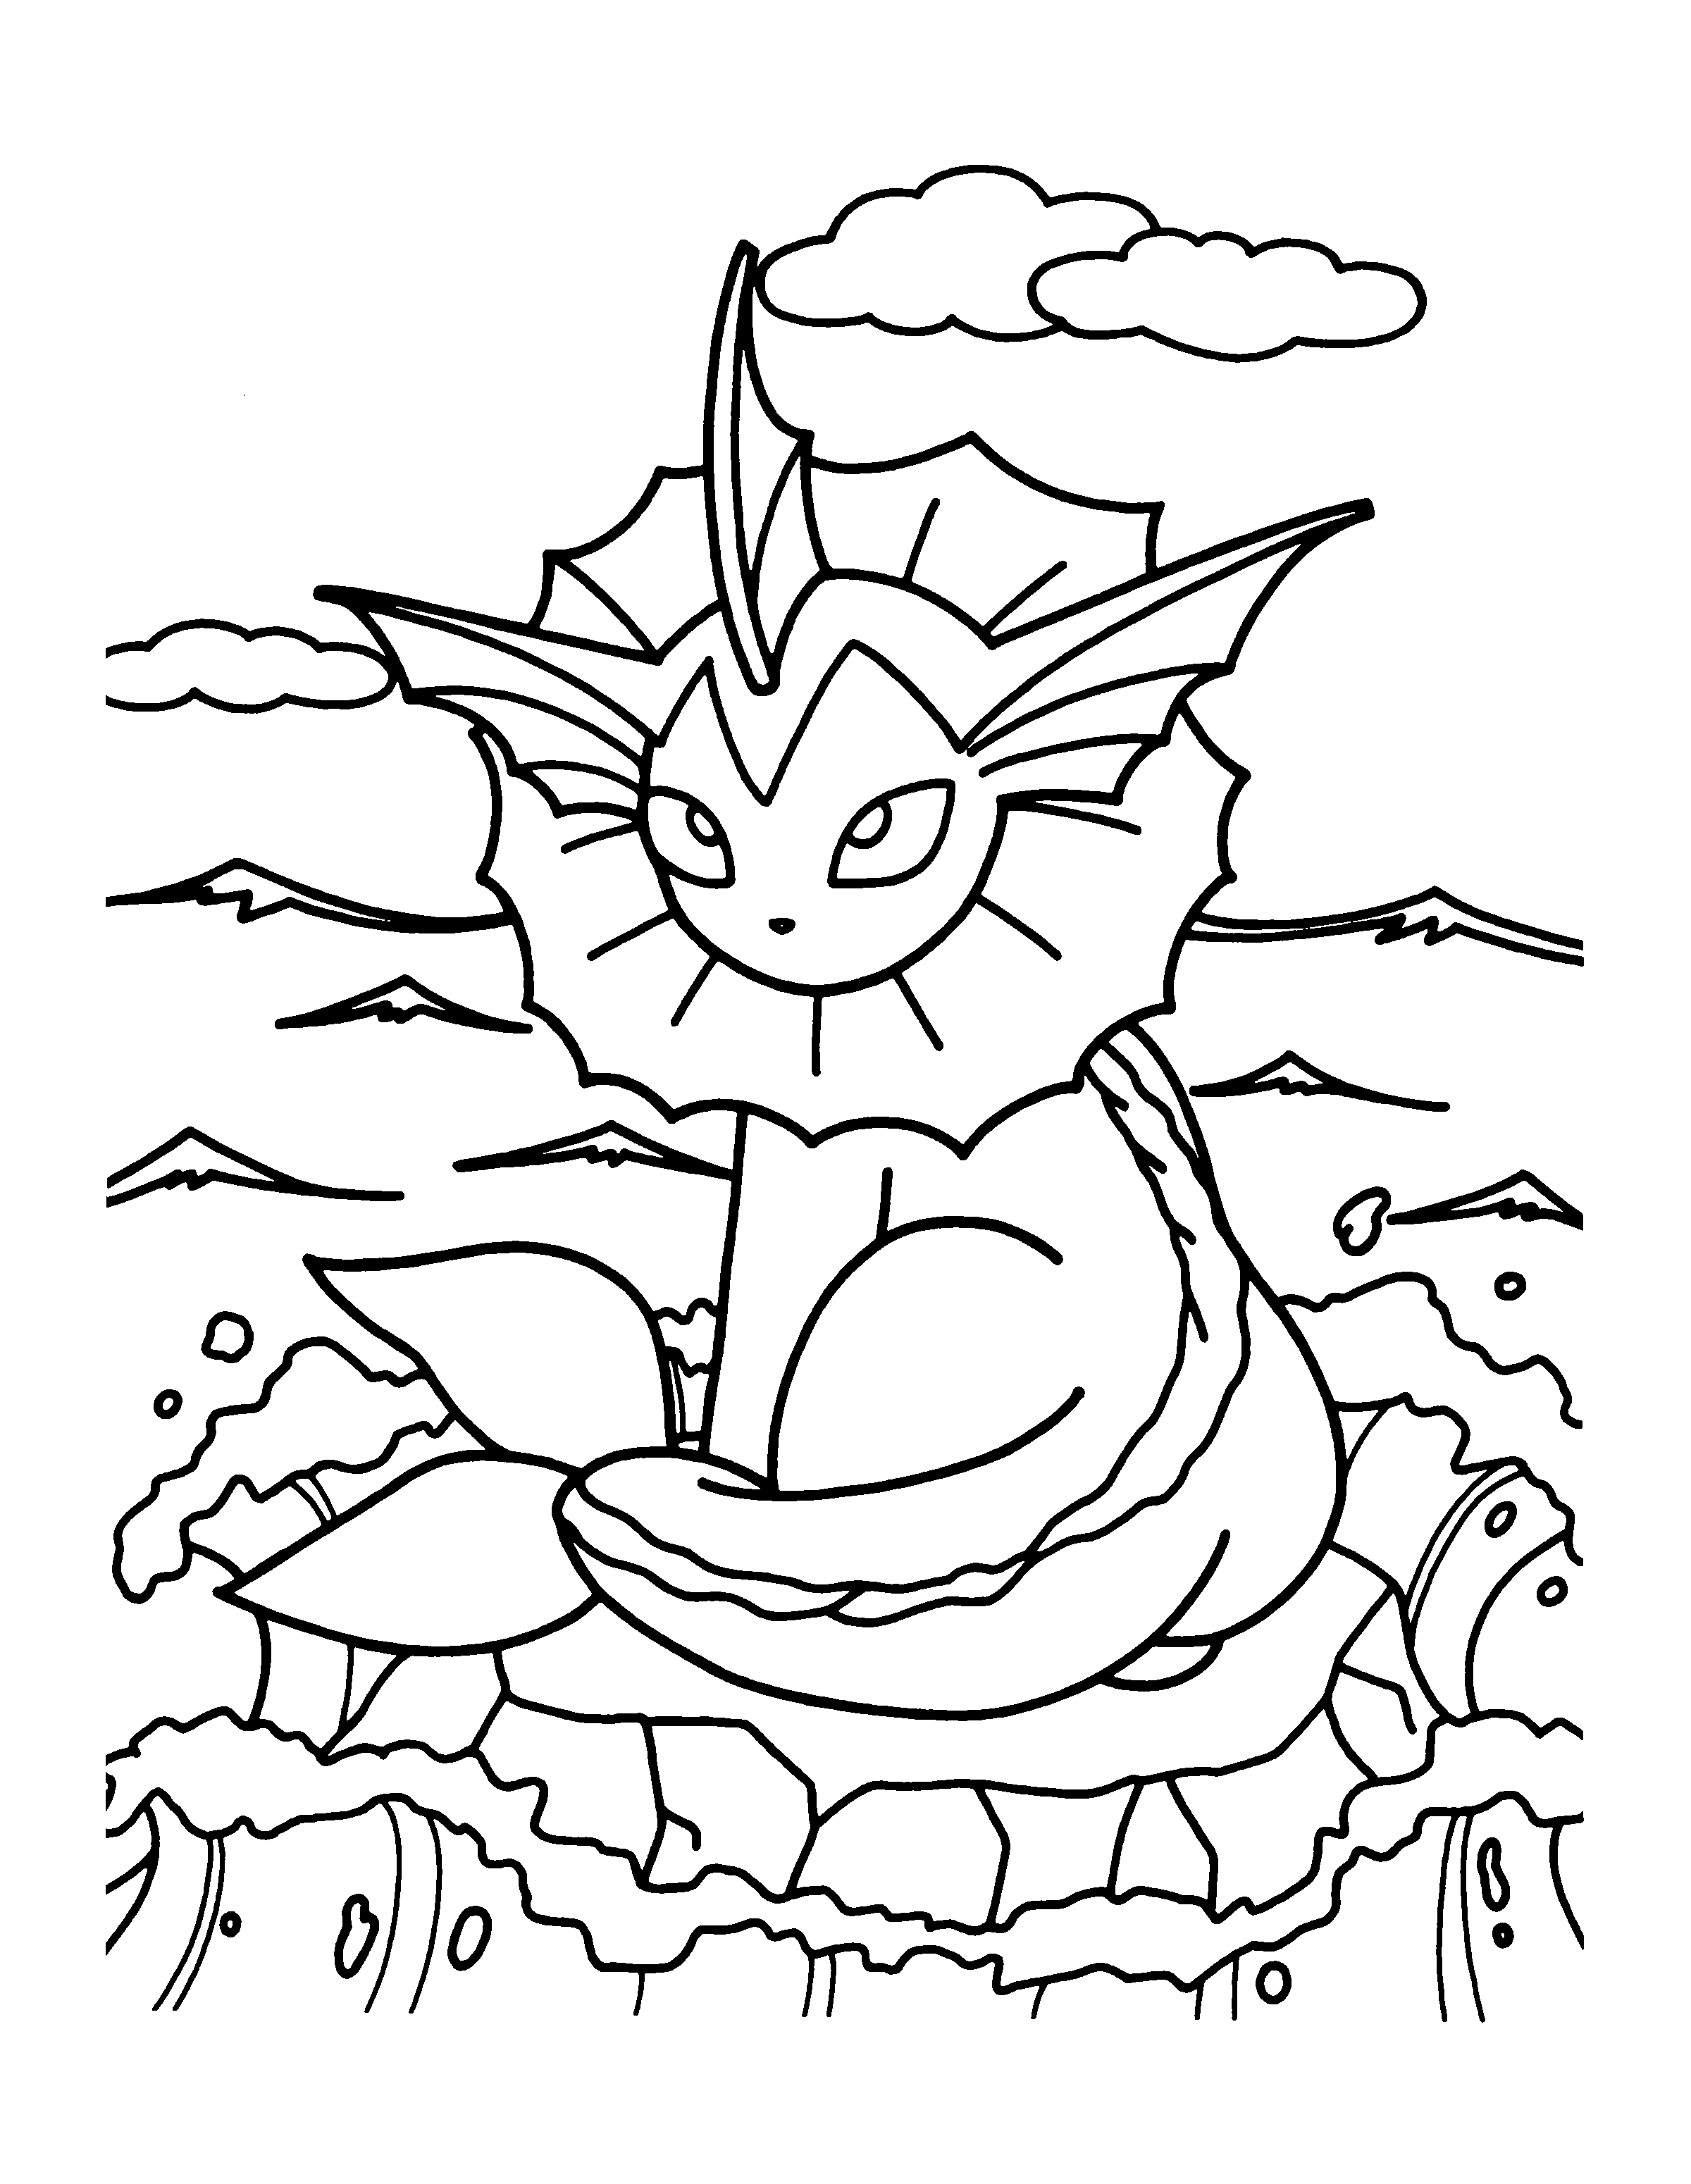 Cool Pokemon 11 Coloring Page